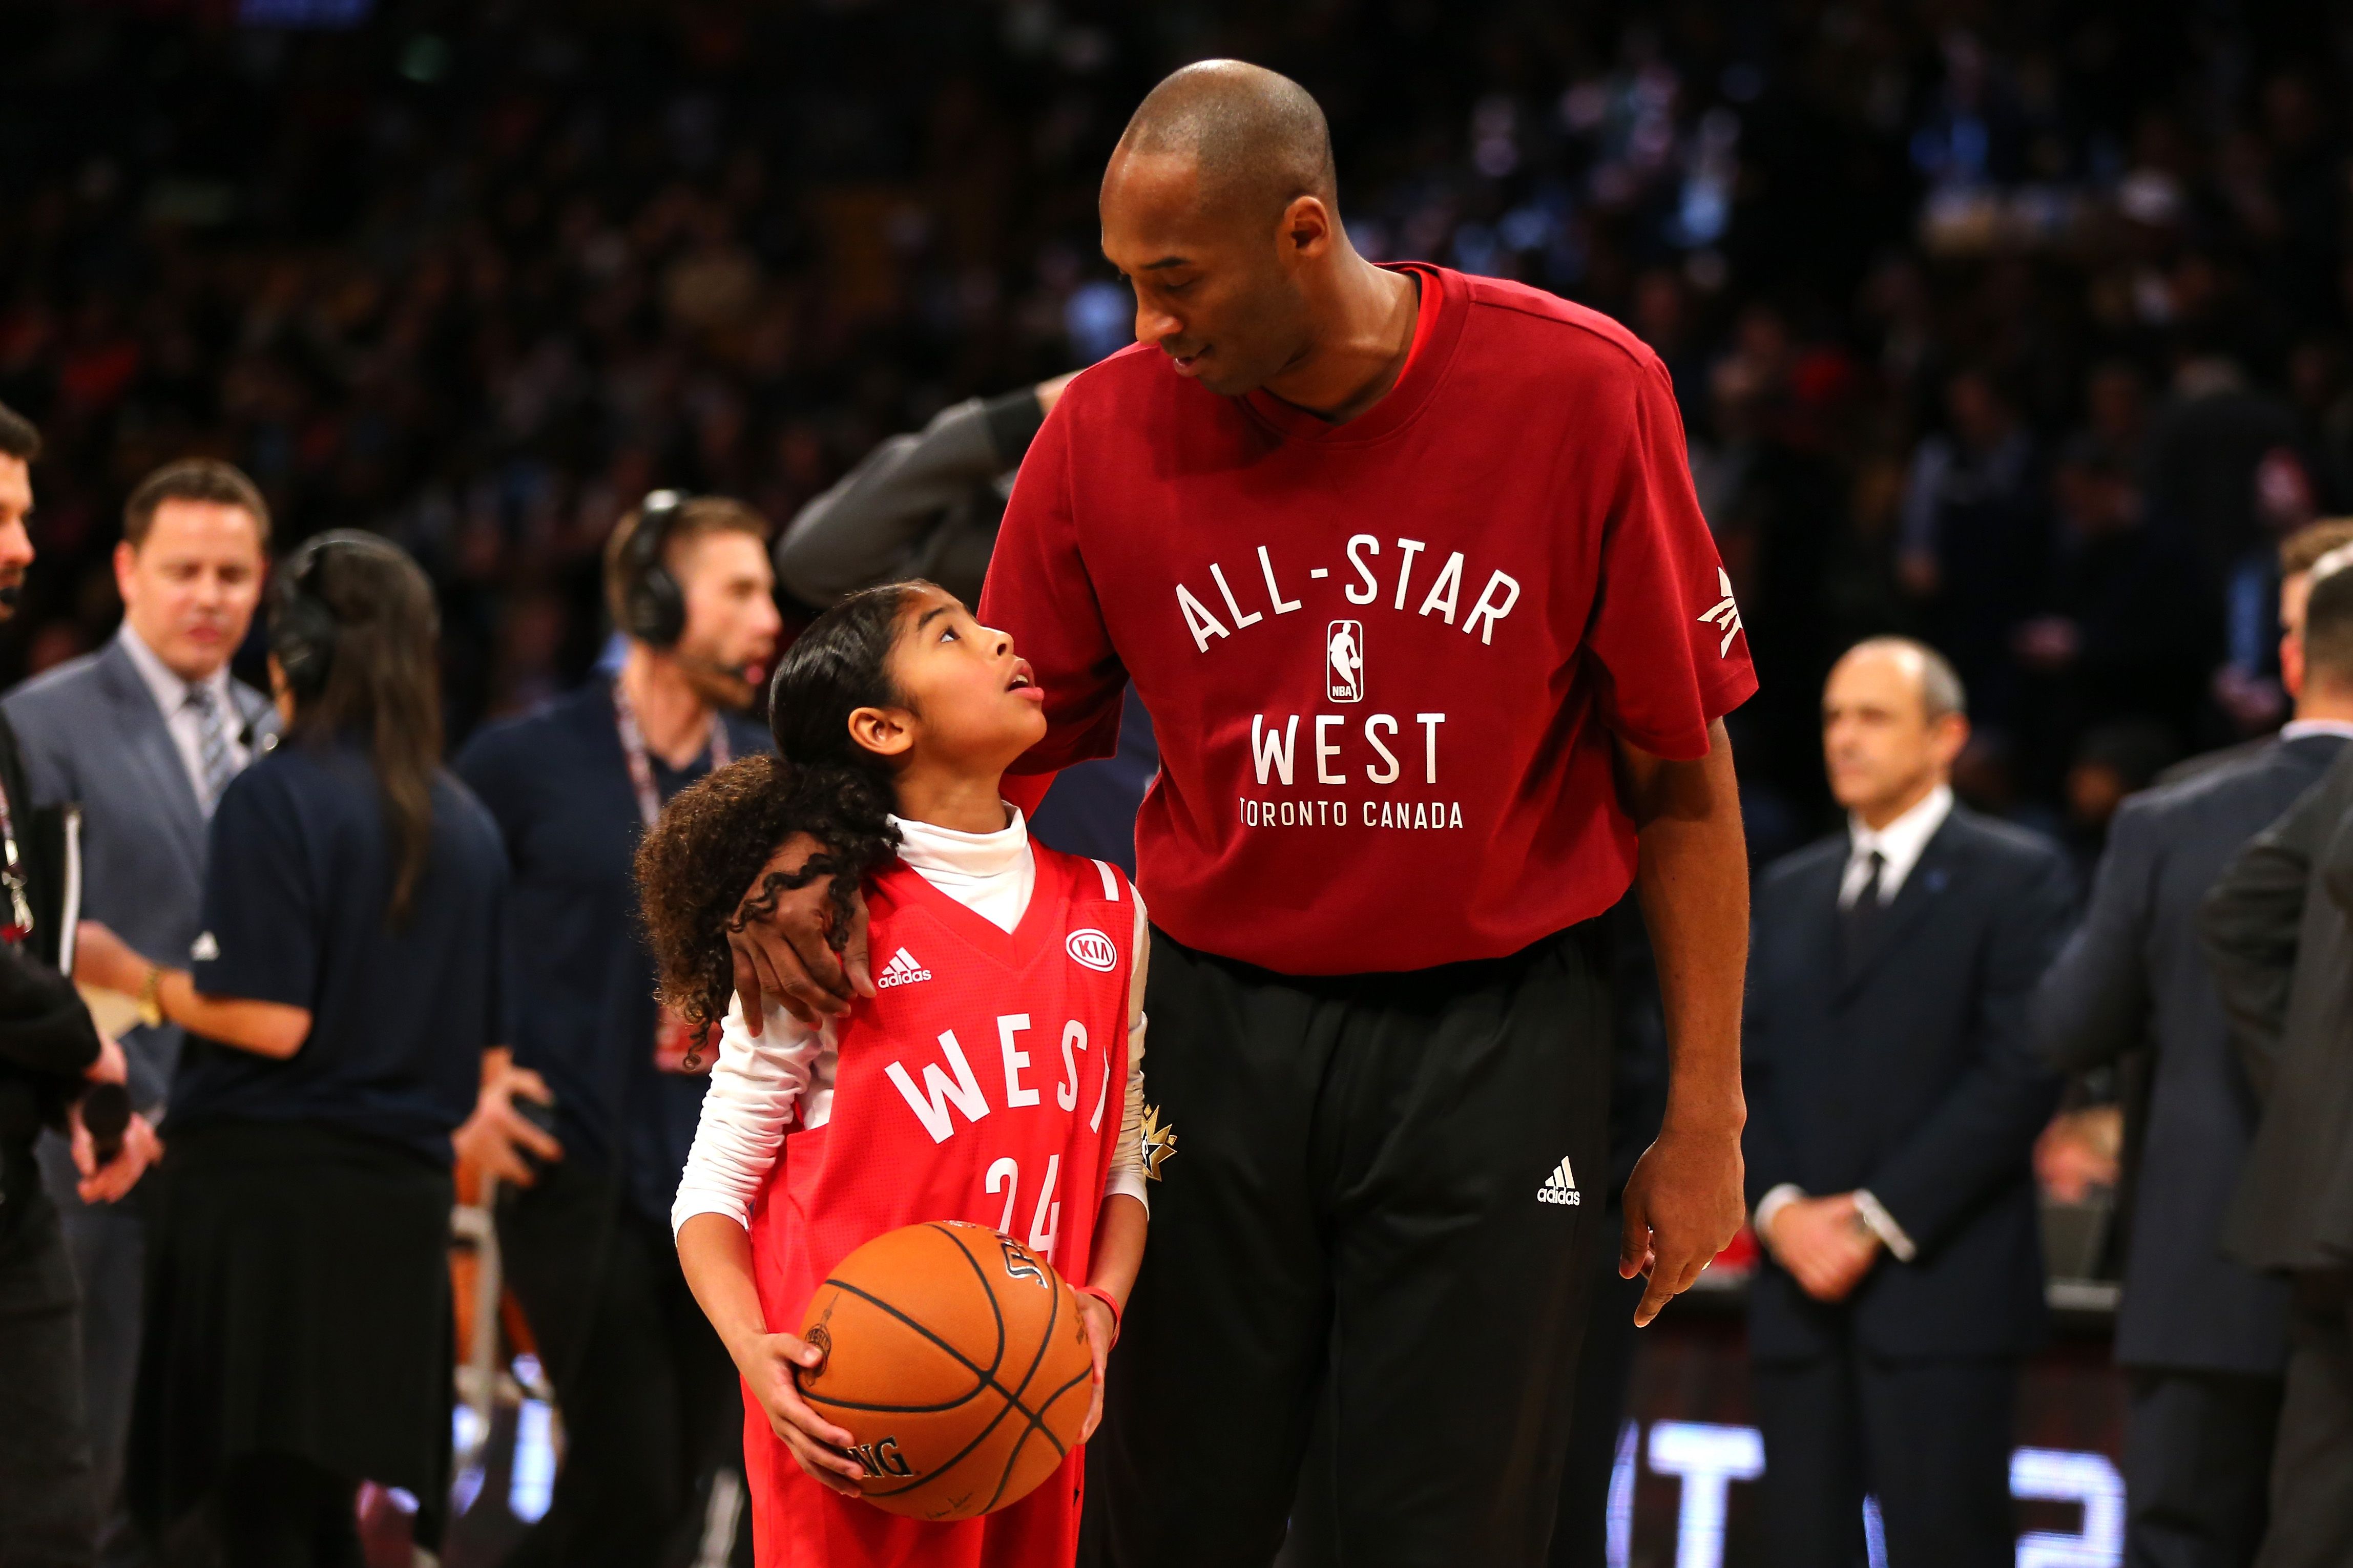 Kobe Bryant with daughter Gianna Bryant at the NBA All-Star Game 2016 at the Air Canada Centre on February 14, 2016 | Photo: Getty Images